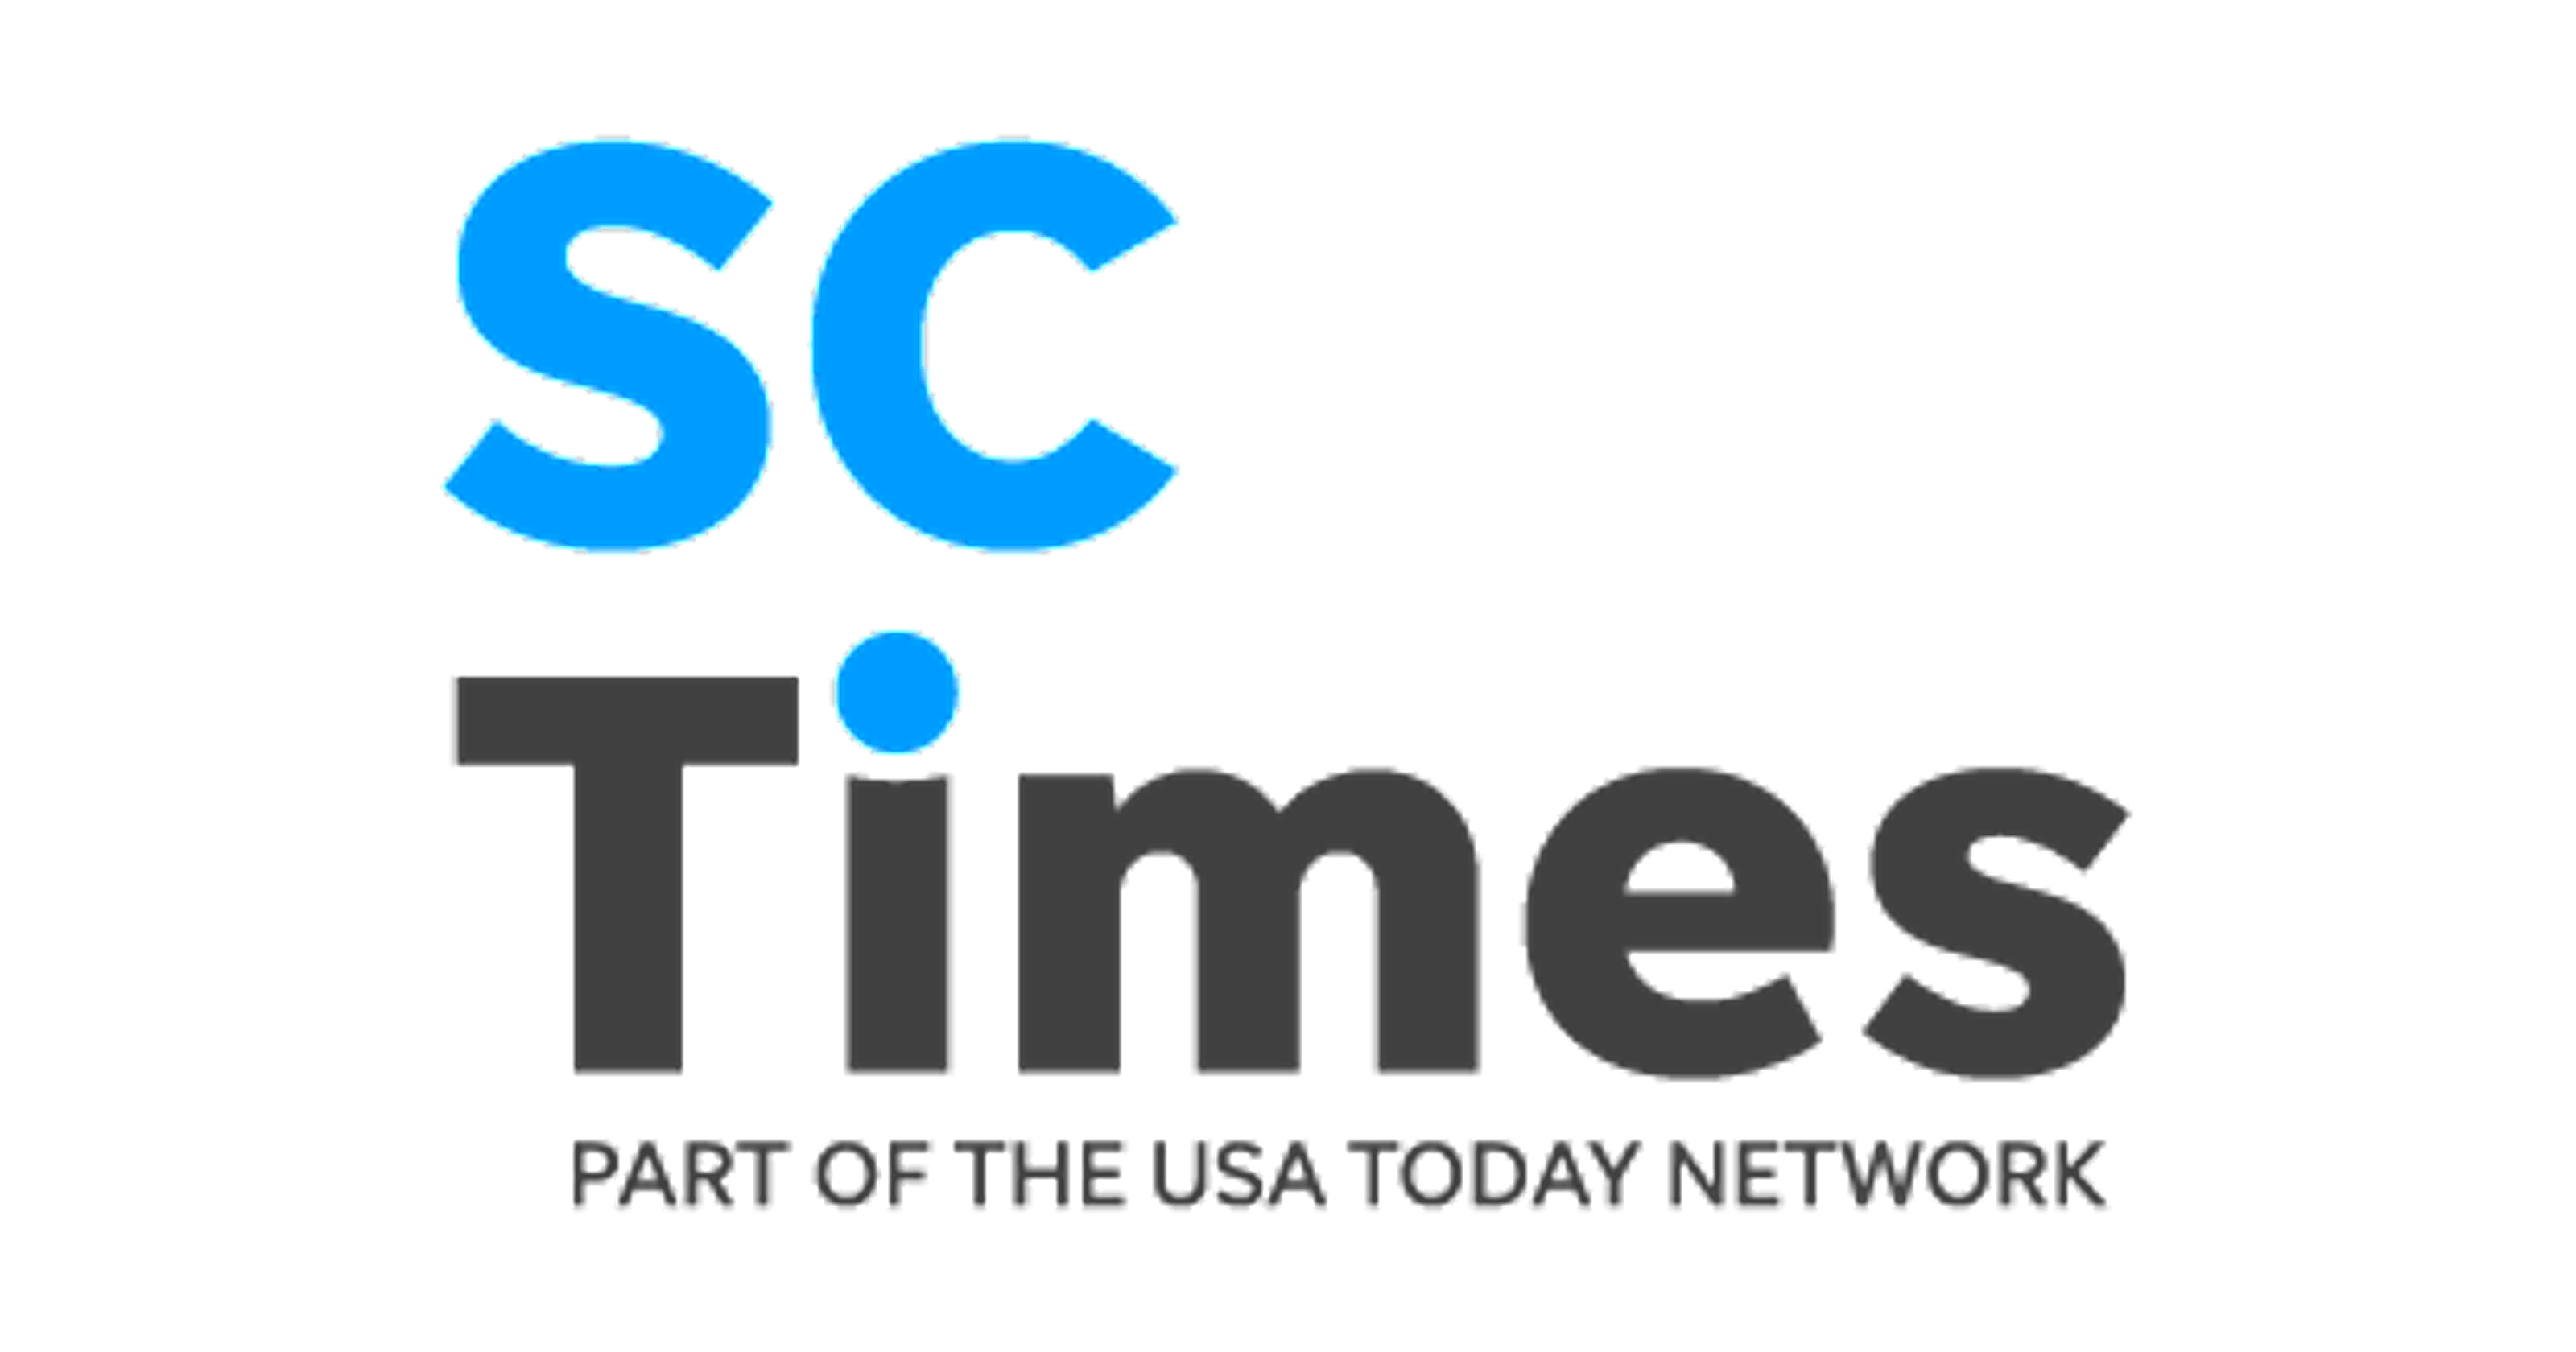 St. Cloud Logo - Road conditions delay delivery of the Times print edition